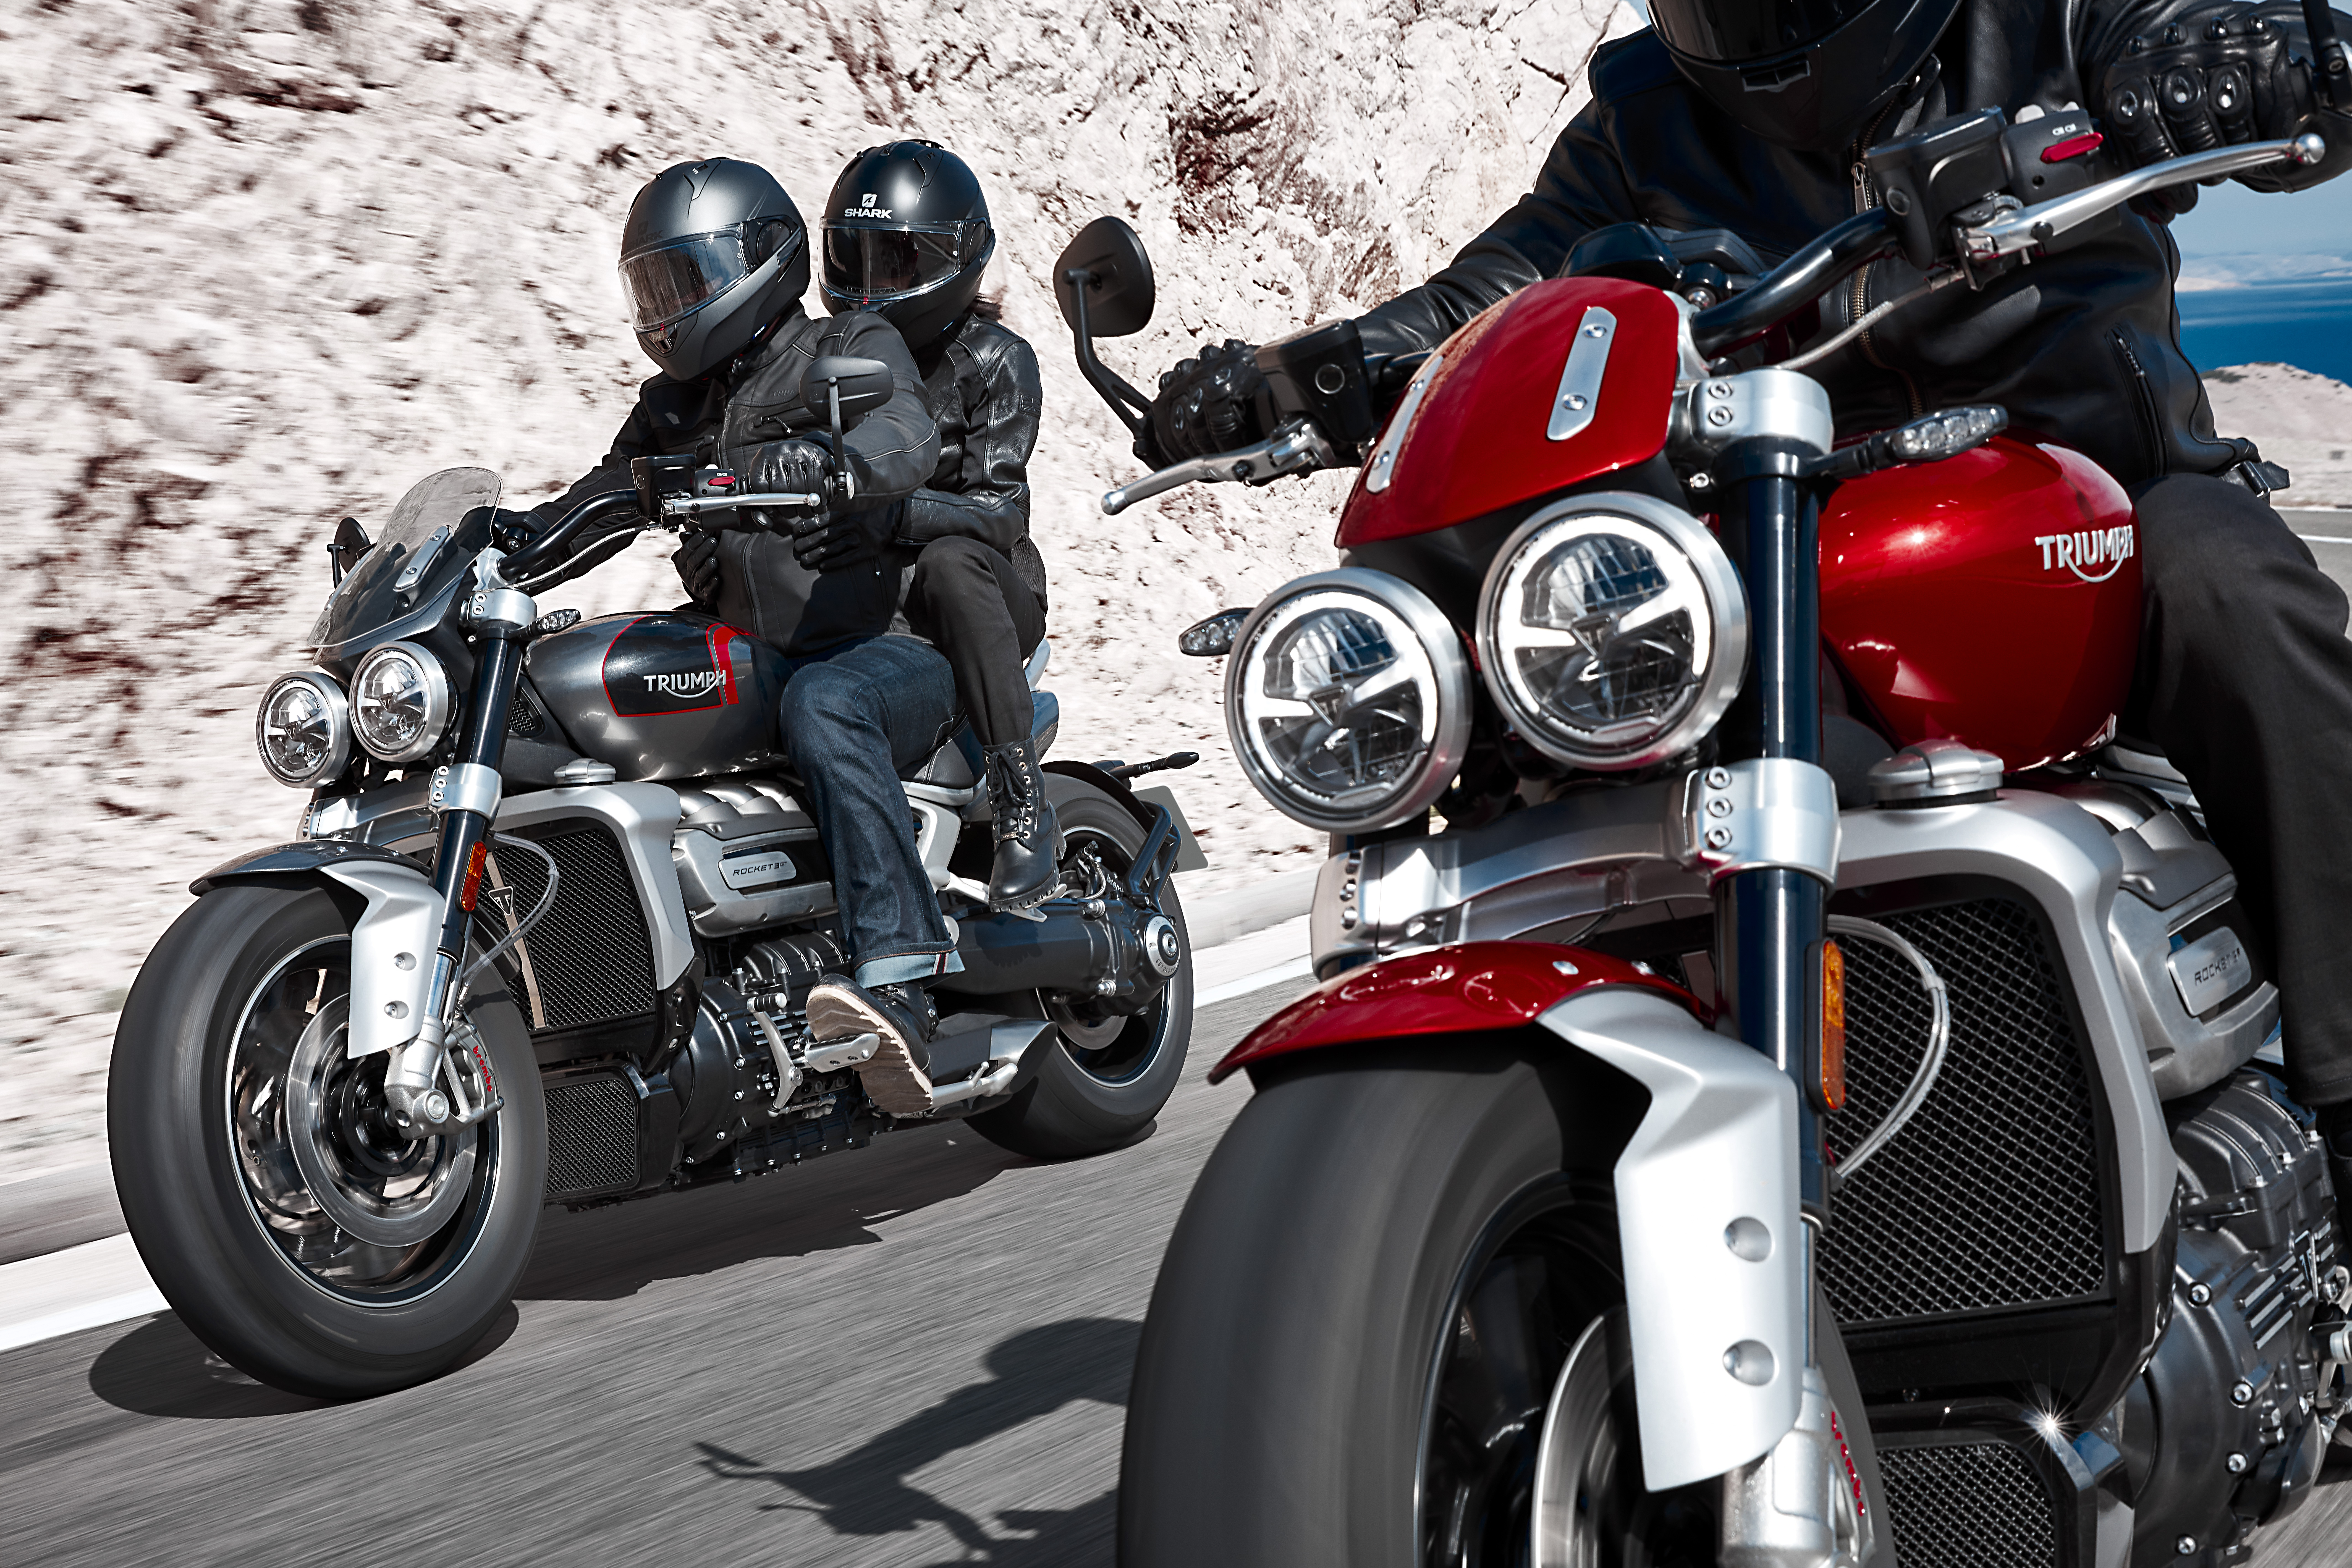 Despite modern motorcycles being more reliable than ever, breakdowns do happen. Triumph is now adding roadside assistance to their warranty coverage.